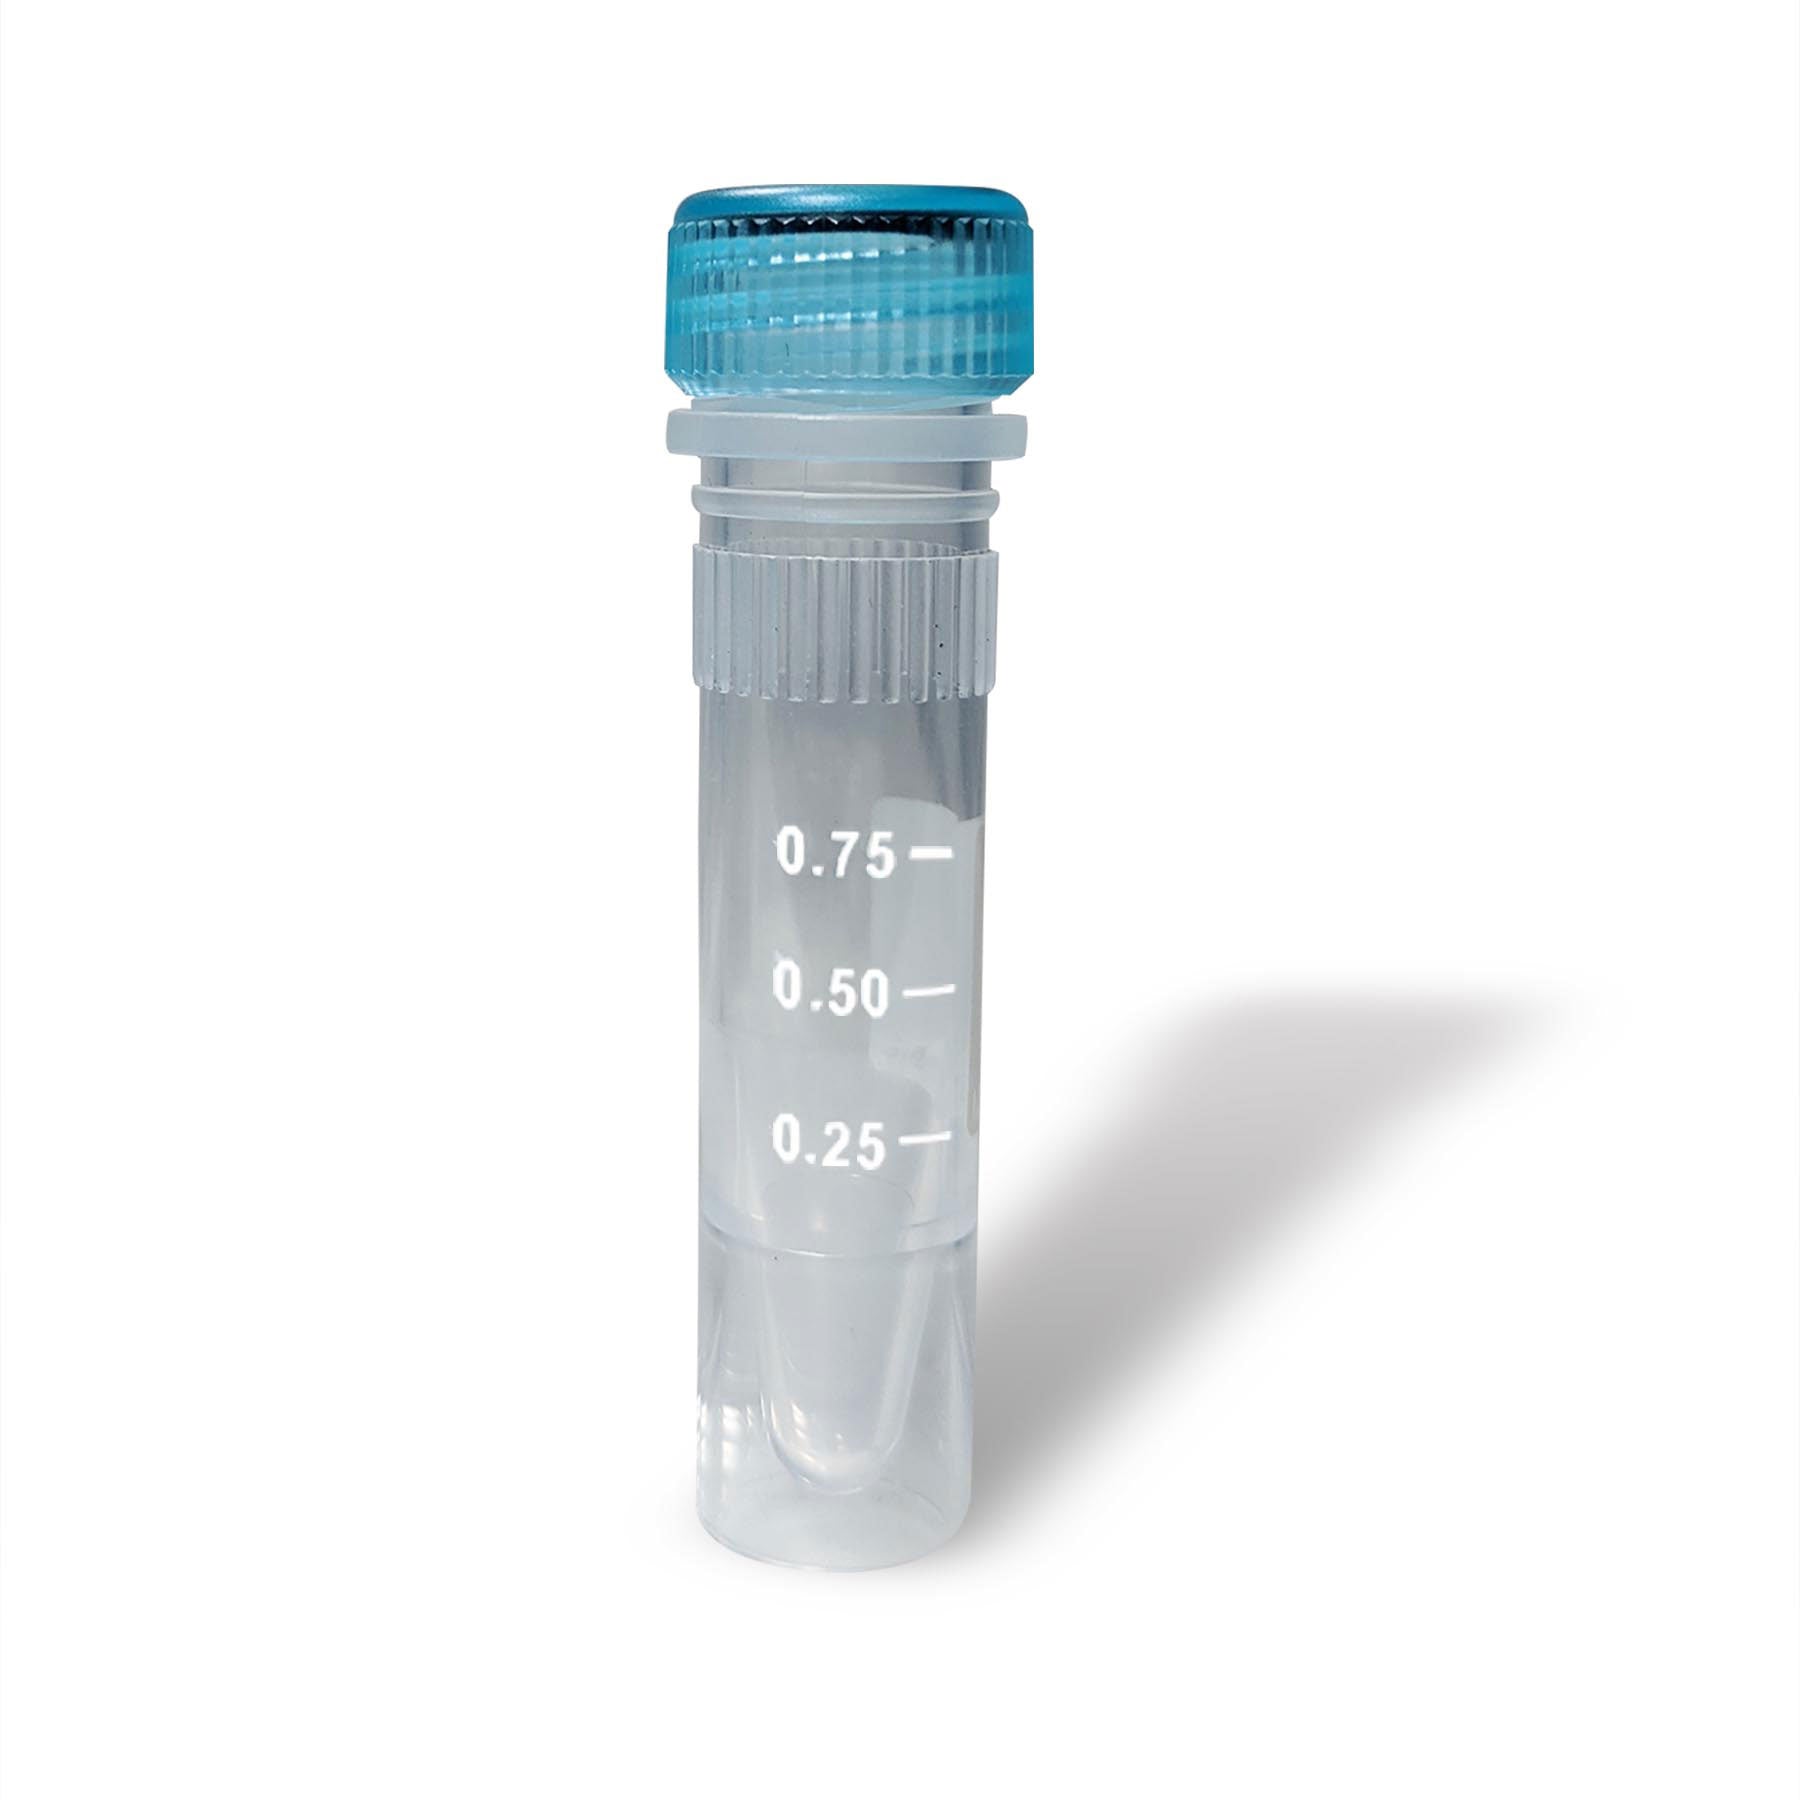 MTC Bio C3215-SG, Clearseal Microcentrifuge Tube, 1.5ml, Sterile, Printed Graduations, Self-Standing, 20 Resealable Bags of 50 Tubes, 1000/cs